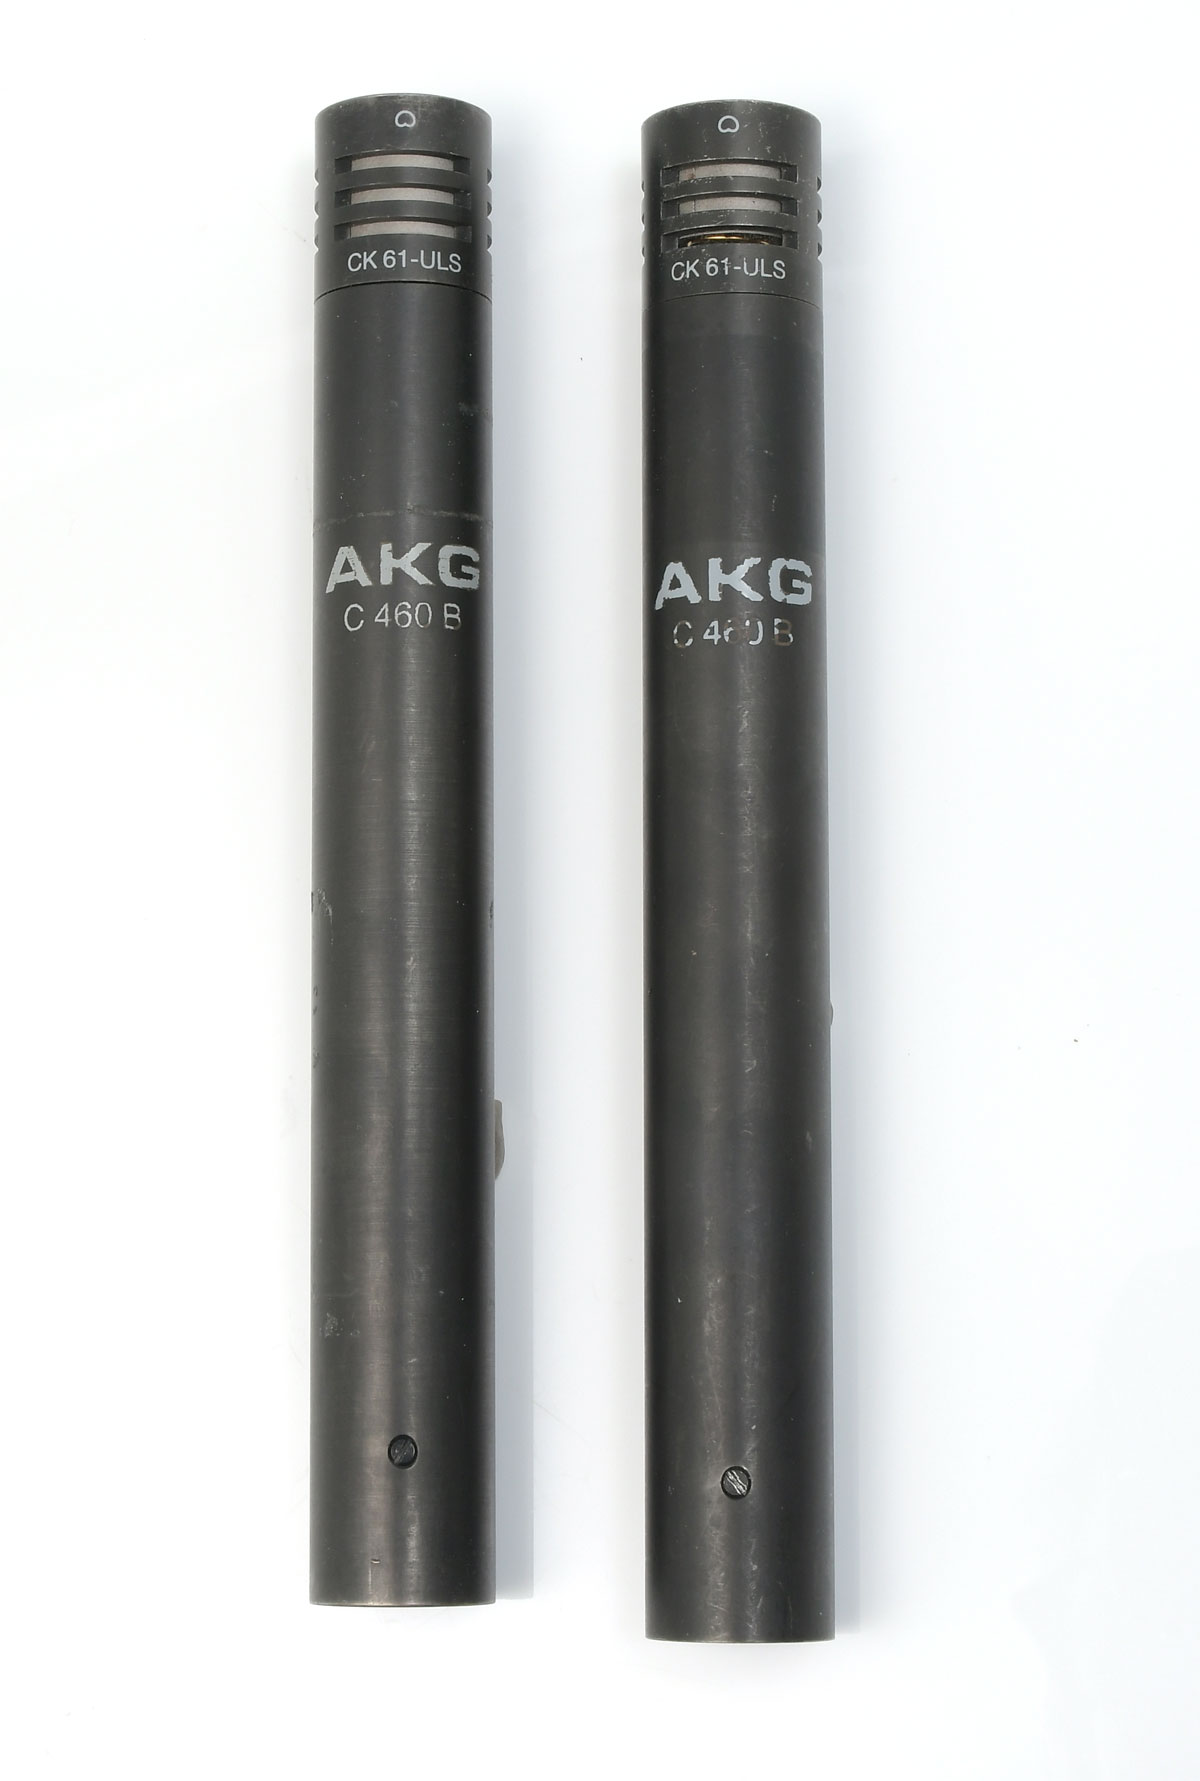 2 PC. AKG C 460 B MICROPHONES: From